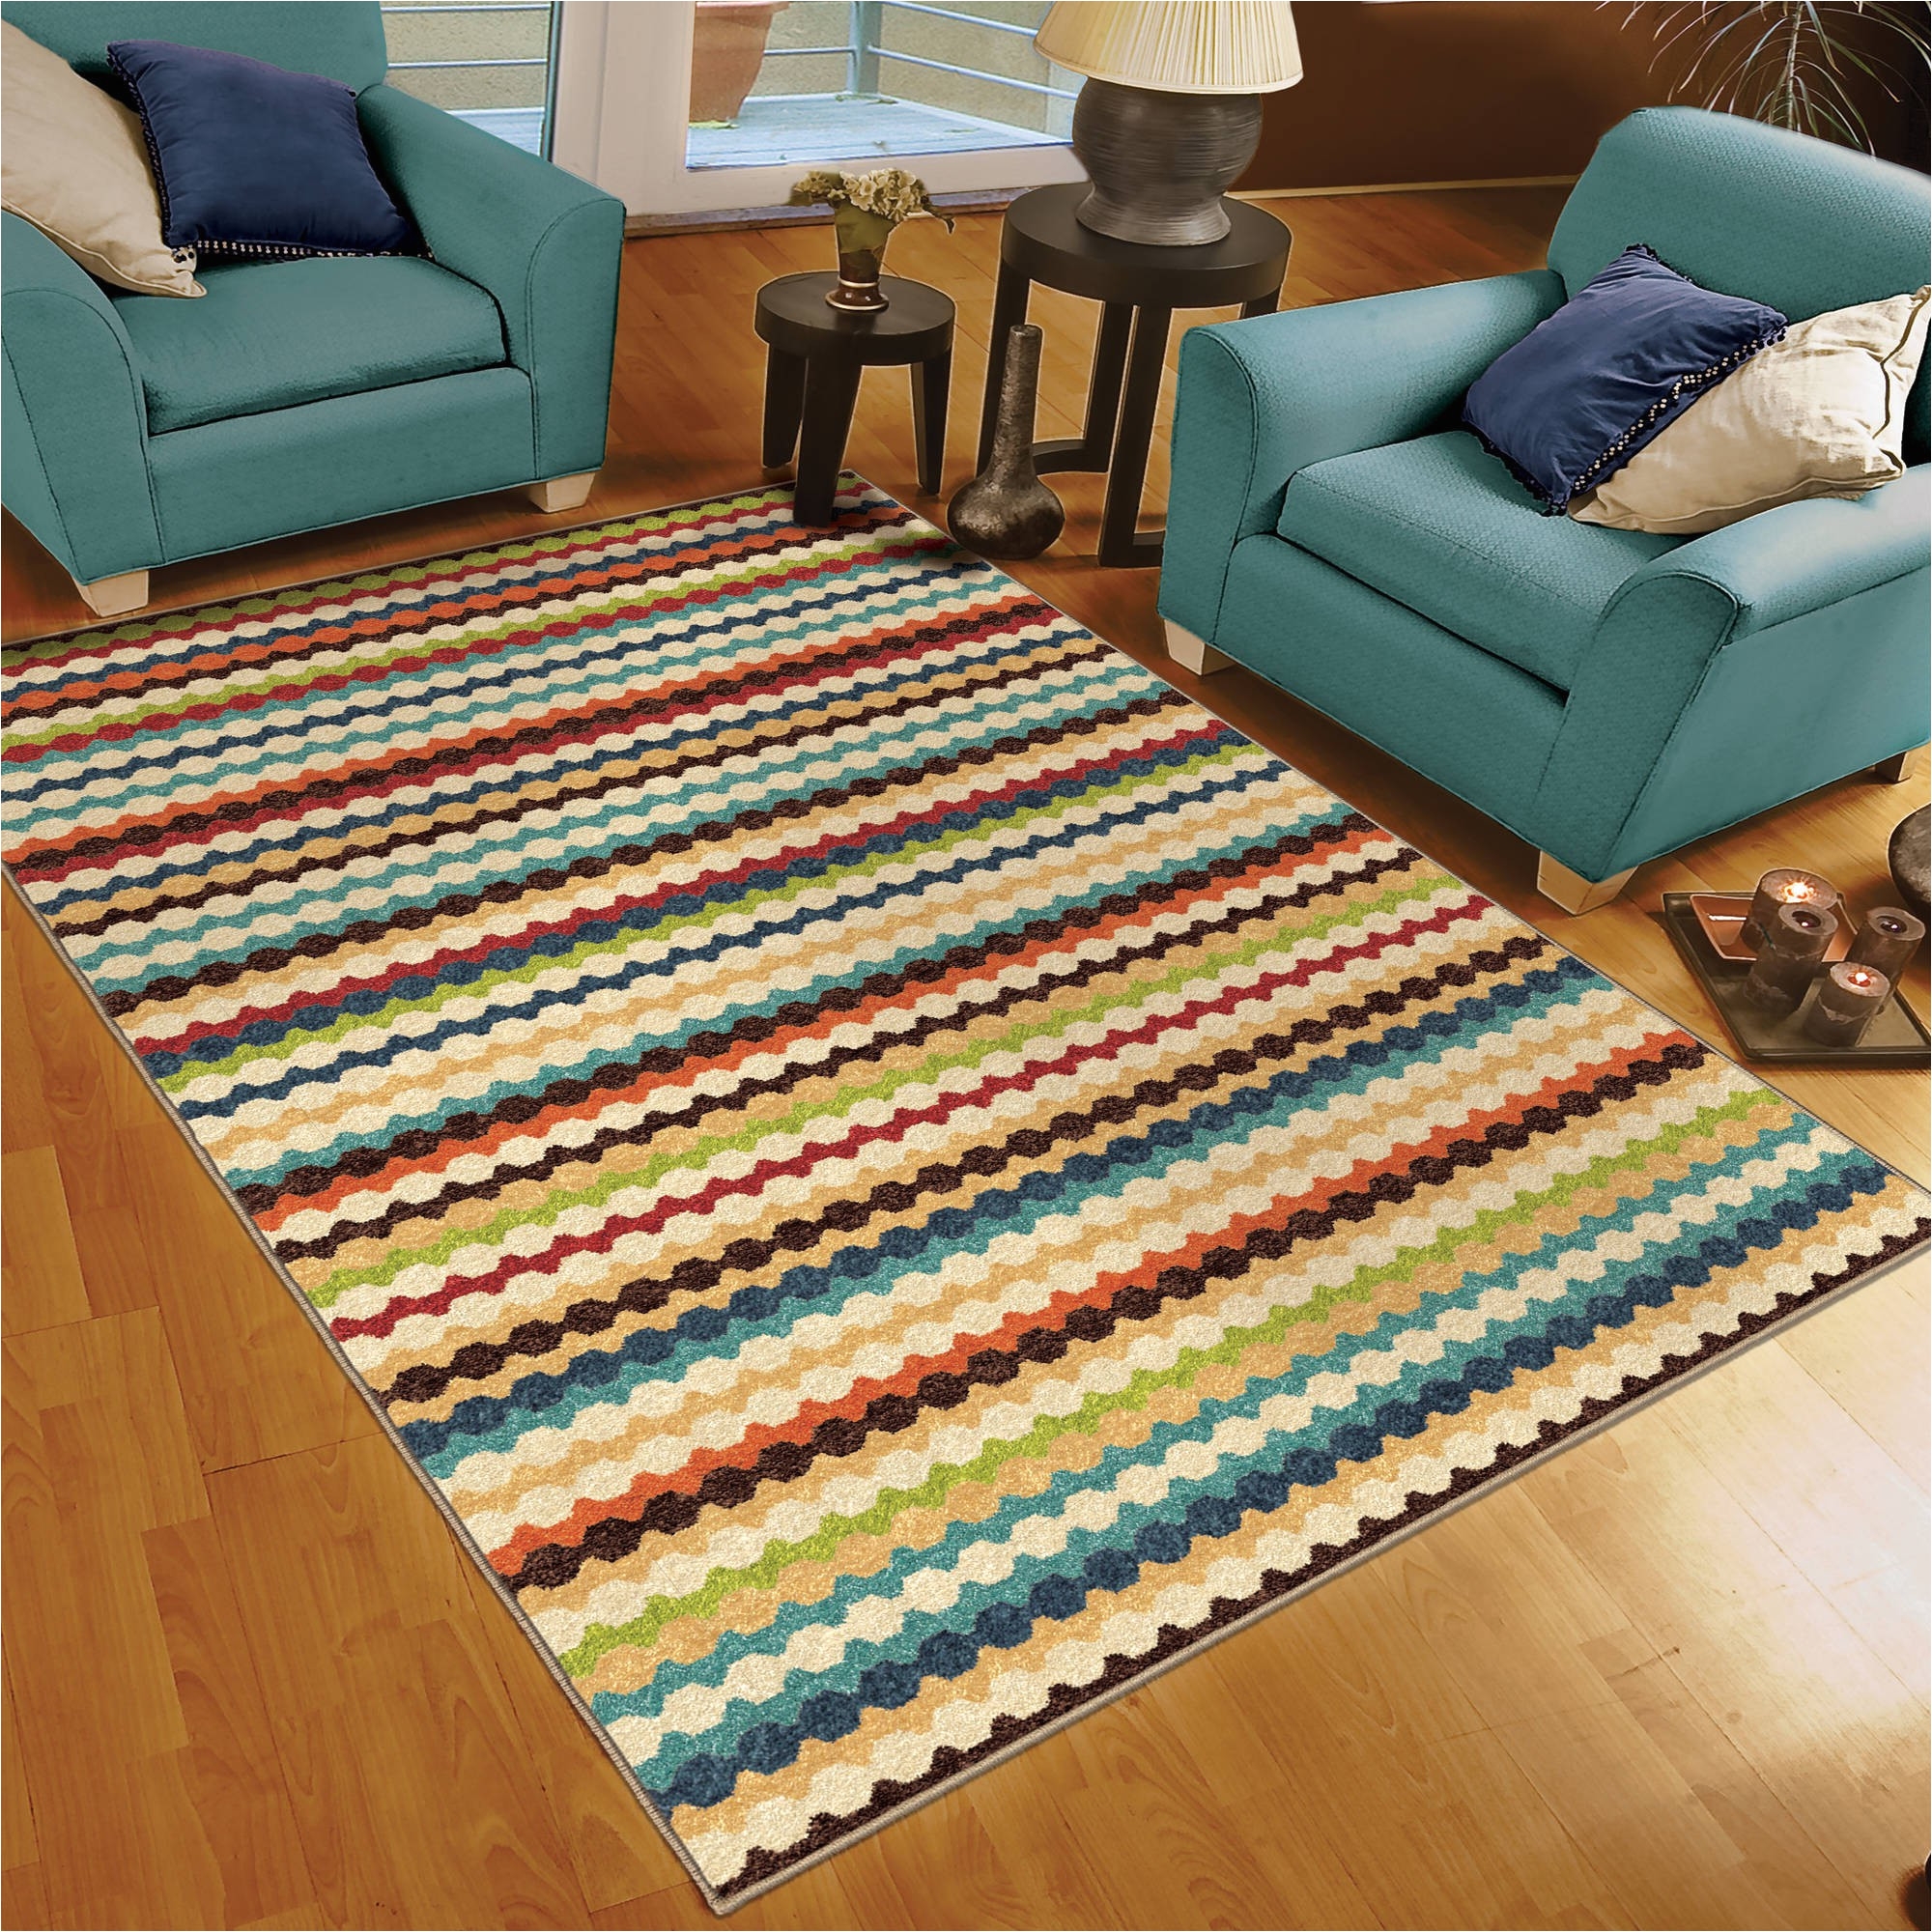 multi colored outdoor rugs lovely inspirational outdoor rugs walmart outdoor of 36 new multi colored outdoor